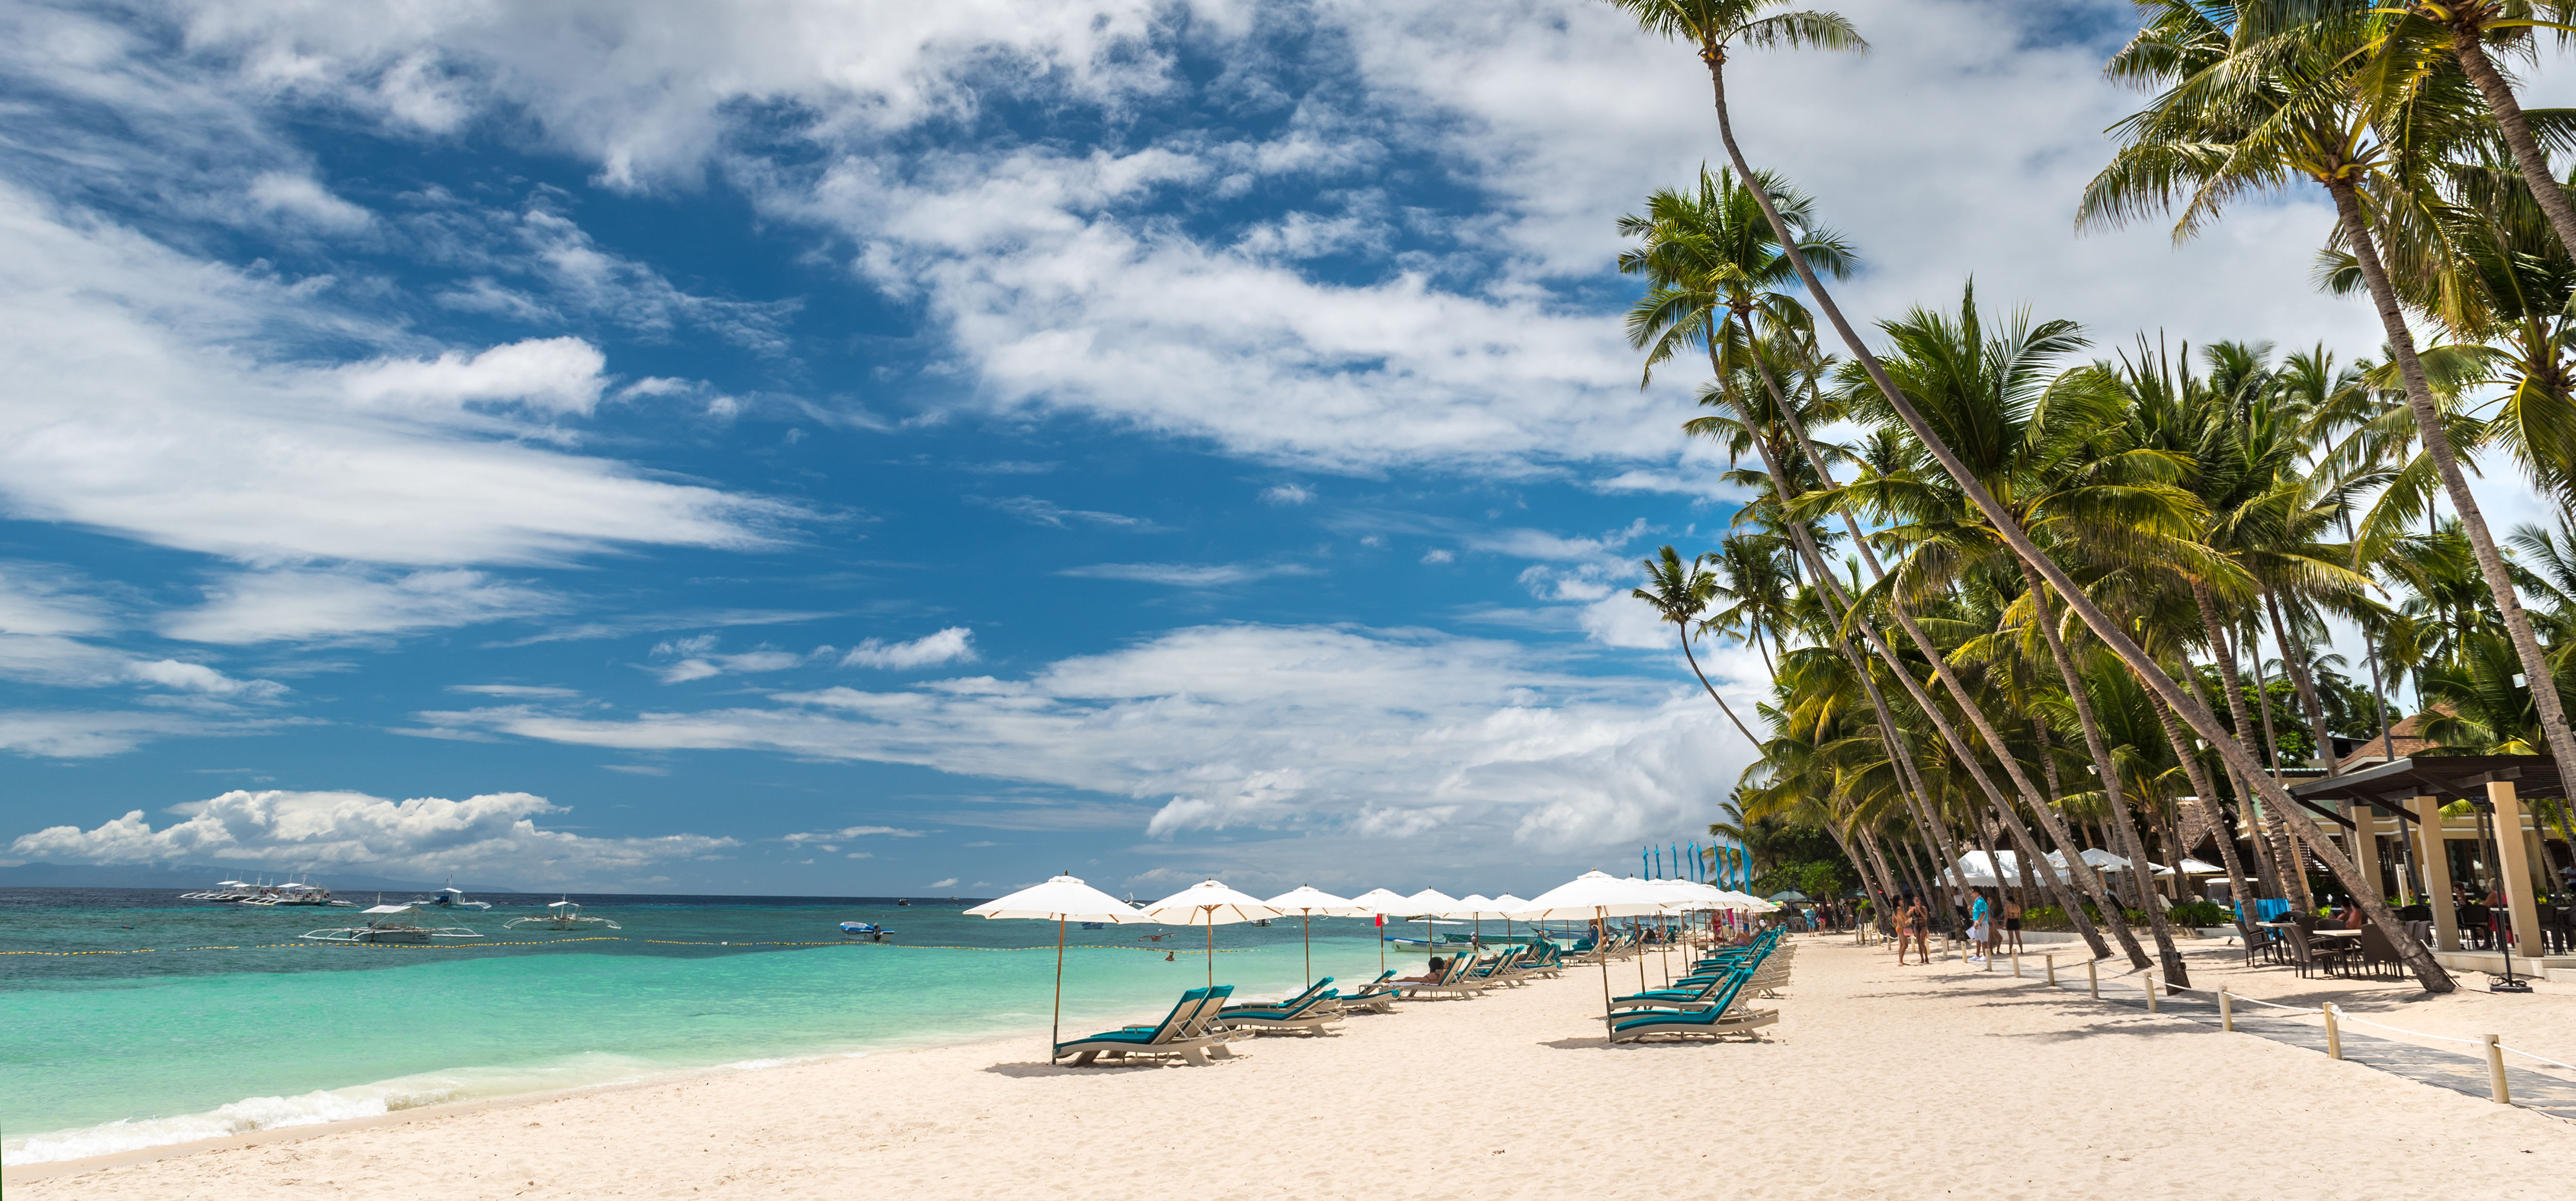 10 Best Resorts in Bohol Philippines: Beachfront, With Pool, Family-Friendly